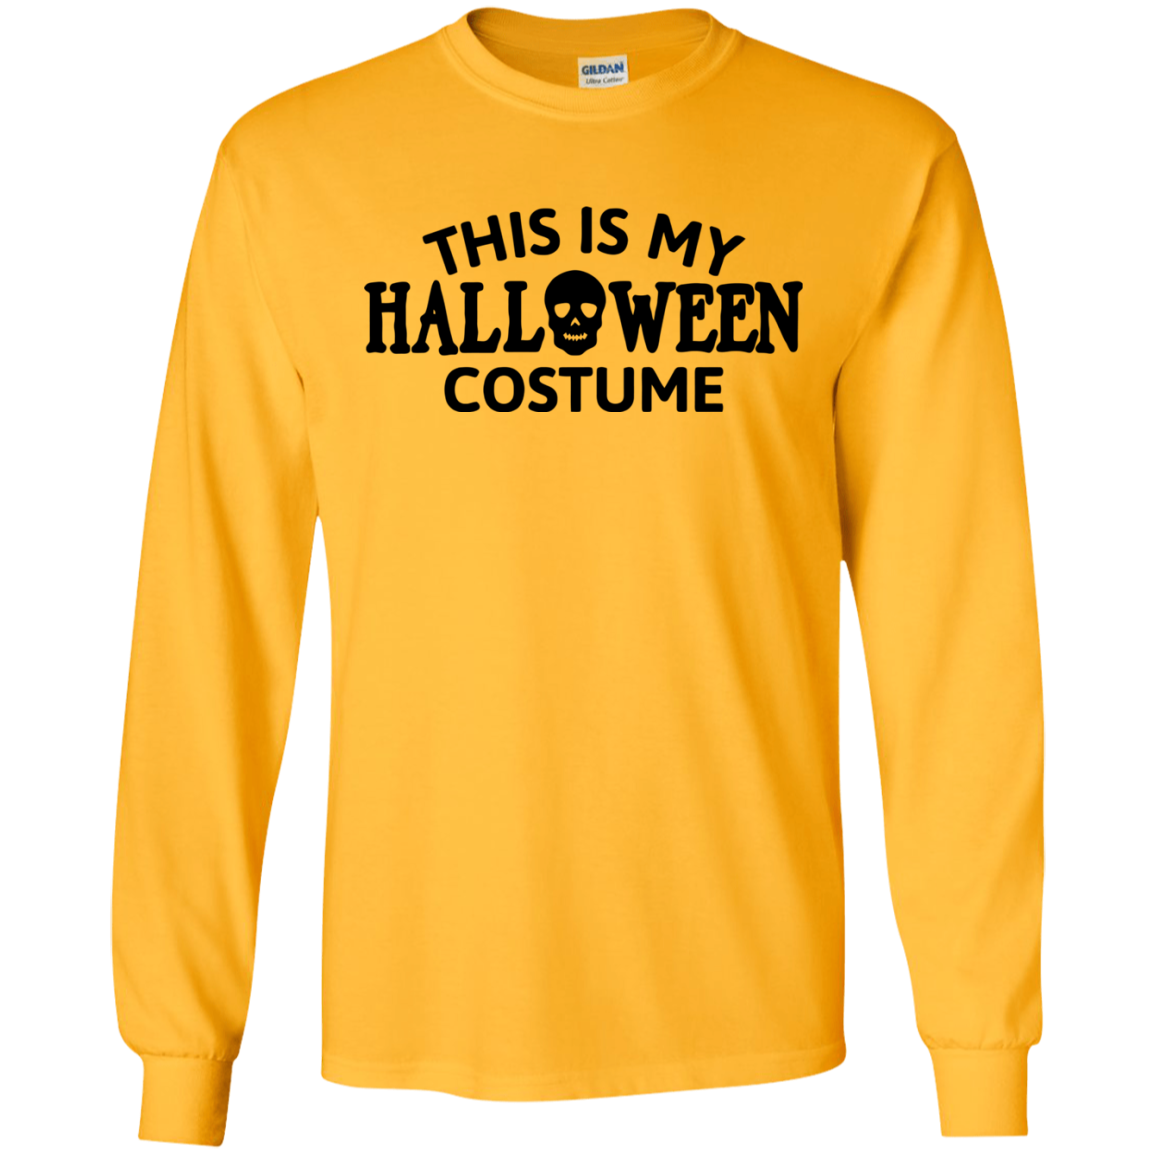 Top Sale This Is My Halloween Costume Shirts